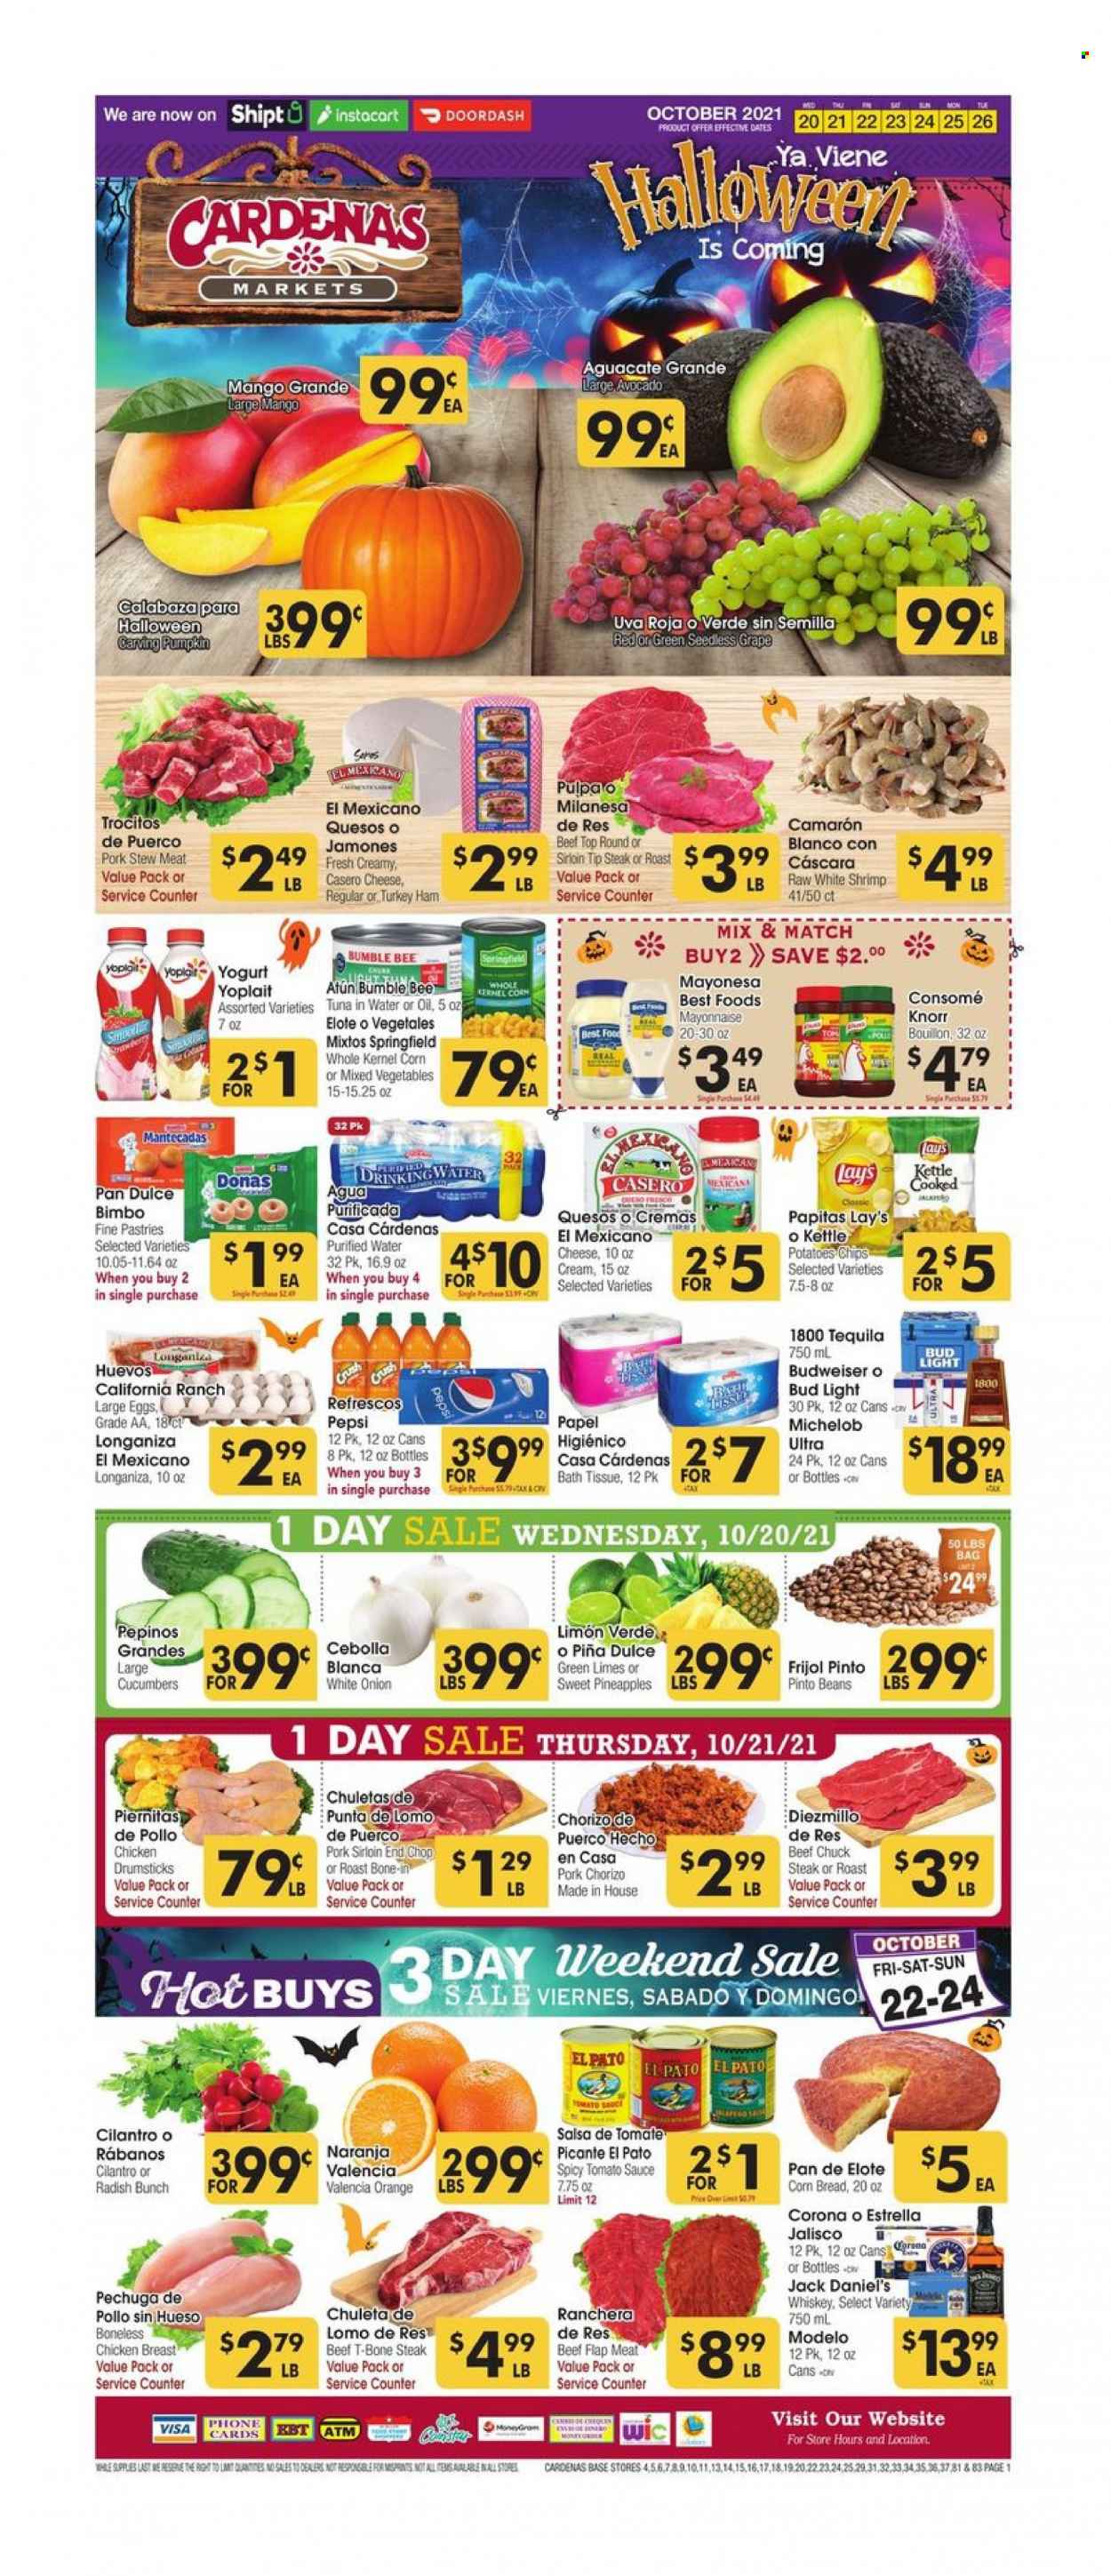 thumbnail - Cardenas Flyer - 10/20/2021 - 10/26/2021 - Sales products - stew meat, corn bread, beans, cucumber, radishes, pumpkin, avocado, limes, mango, pineapple, oranges, tuna, shrimps, Jack Daniel's, Bumble Bee, Knorr, sauce, ham, chorizo, cheese, yoghurt, Yoplait, large eggs, mayonnaise, mixed vegetables, chips, Lay’s, bouillon, tomato sauce, tuna in water, pinto beans, cilantro, salsa, Pepsi, purified water, tequila, whiskey, whisky, beer, Bud Light, Corona Extra, Modelo, chicken breasts, chicken drumsticks, beef meat, t-bone steak, steak, chuck steak, pork loin, bath tissue, pan, Halloween, Budweiser, Michelob. Page 1.